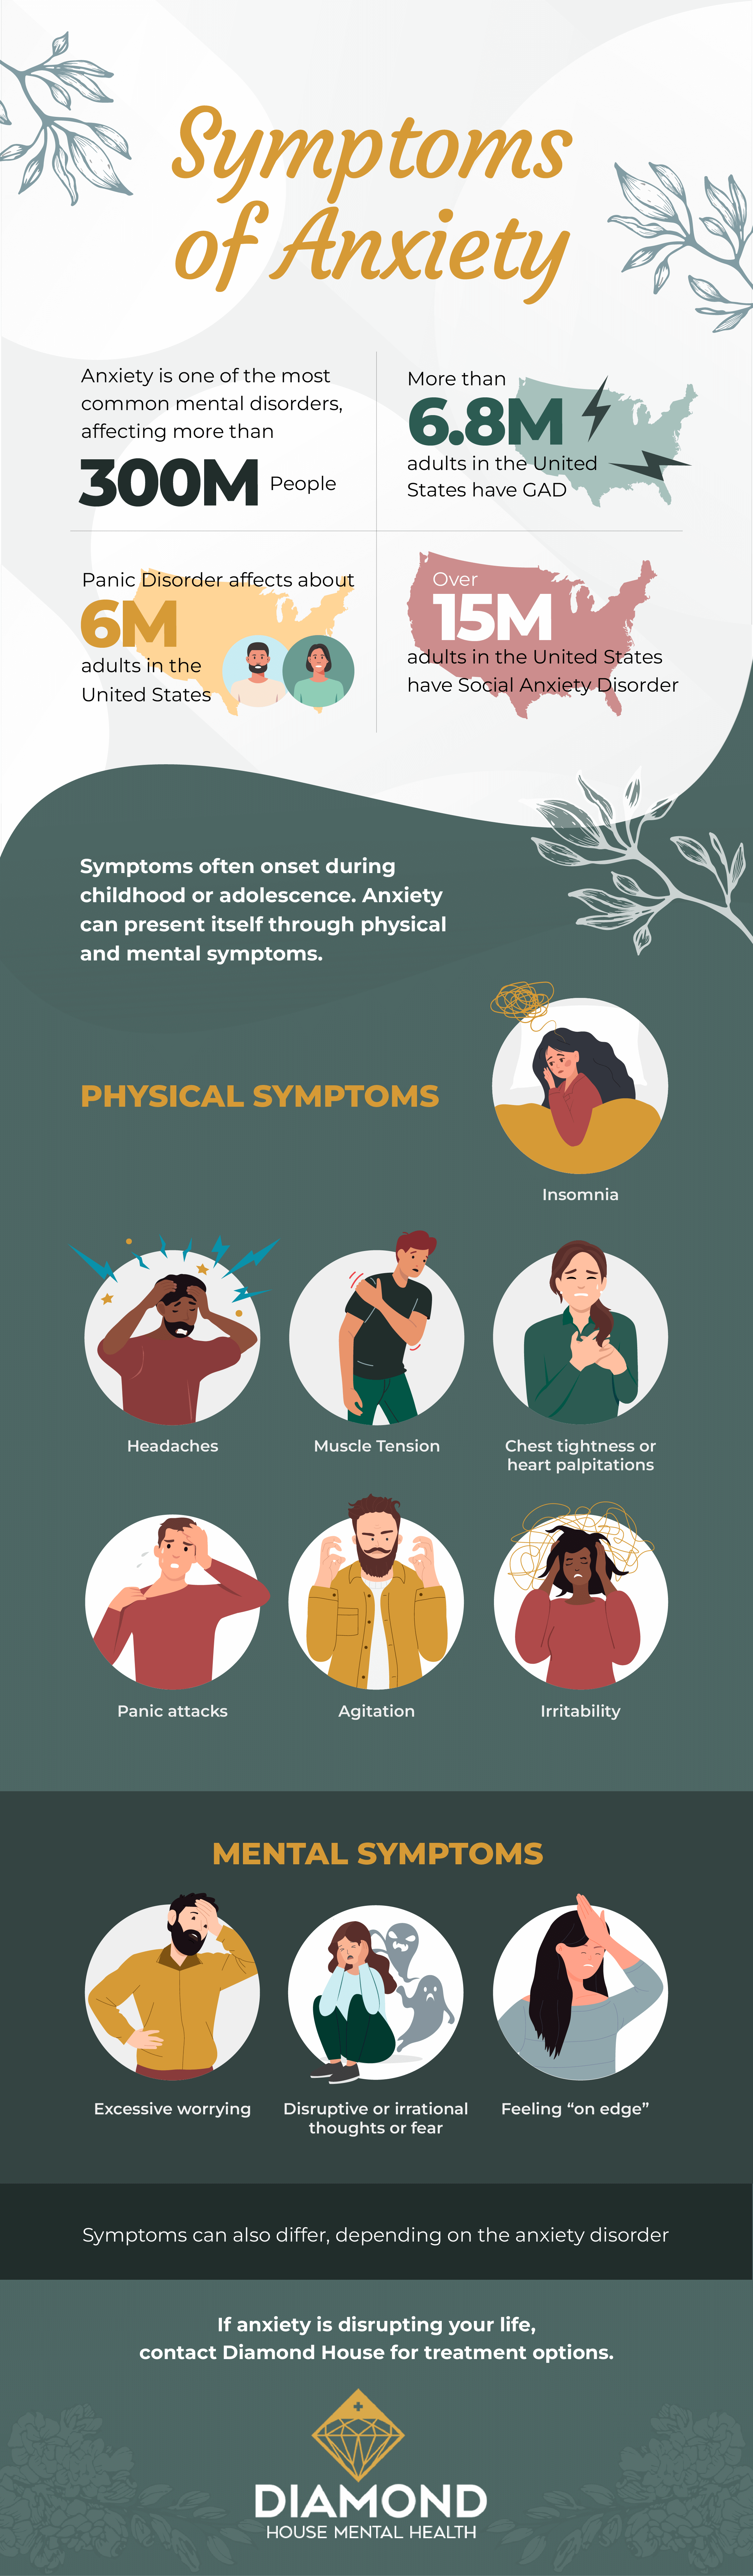 symptoms of anxiety